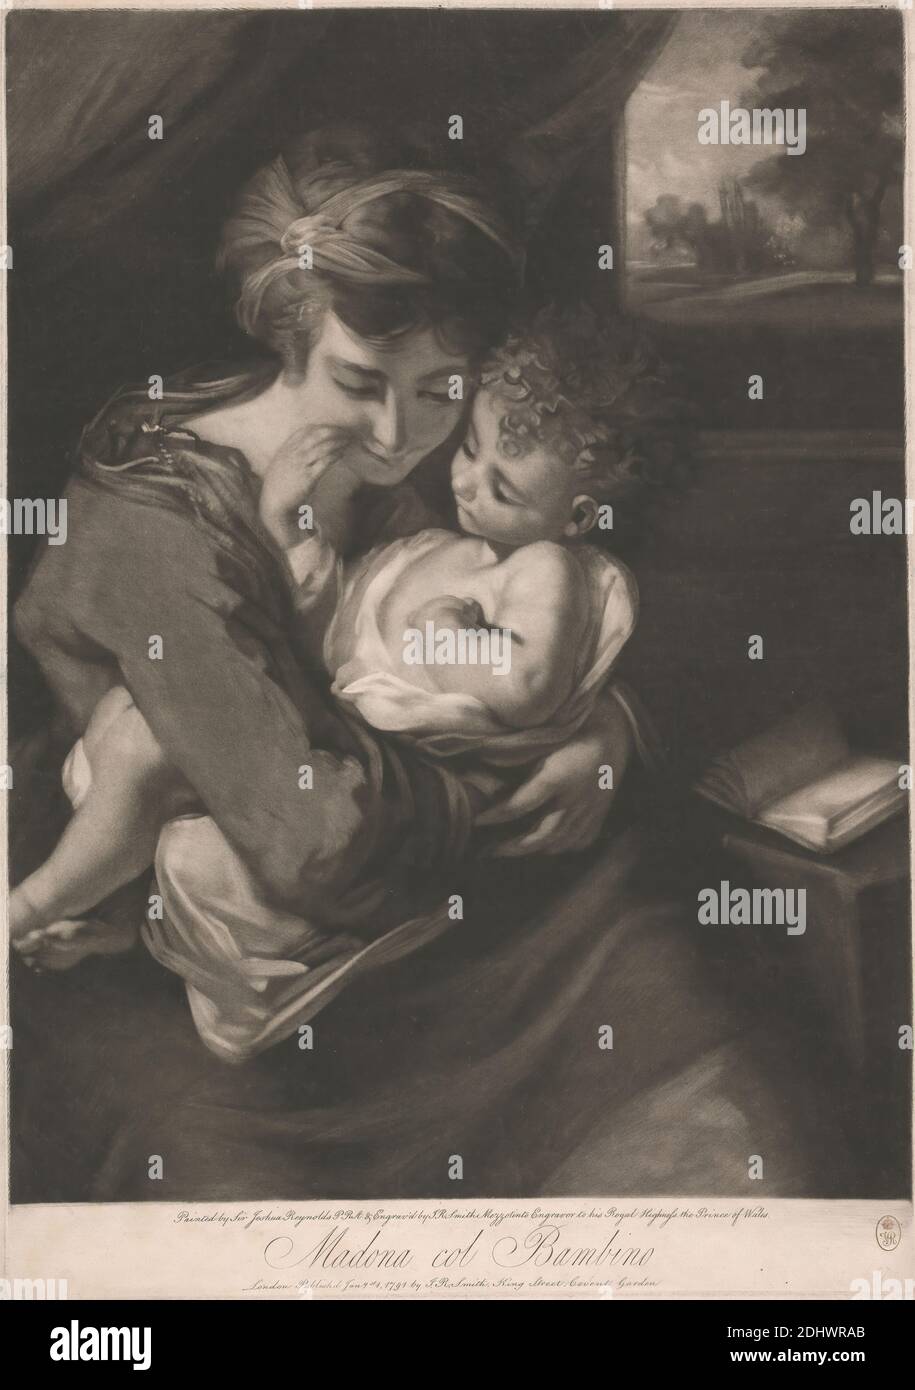 Madona col Bambino, Print made by John Raphael Smith, 1752–1812, British, after Sir Joshua Reynolds RA, 1723–1792, British, 1791, Mezzotint (Ham.II) on moerately thick, moderately textured, cream, laid paper, Sheet: 20 1/4 × 14 3/8 inches (51.4 × 36.5 cm), Plate: 19 7/8 × 14 1/16 inches (50.5 × 35.7 cm), and Image: 18 3/8 × 13 15/16 inches (46.7 × 35.4 cm), book, child, Christianity, curtain, embrace, love, Madonna: i.e. Mary with the Christ-child, mother, religious and mythological subject, trees, window Stock Photo